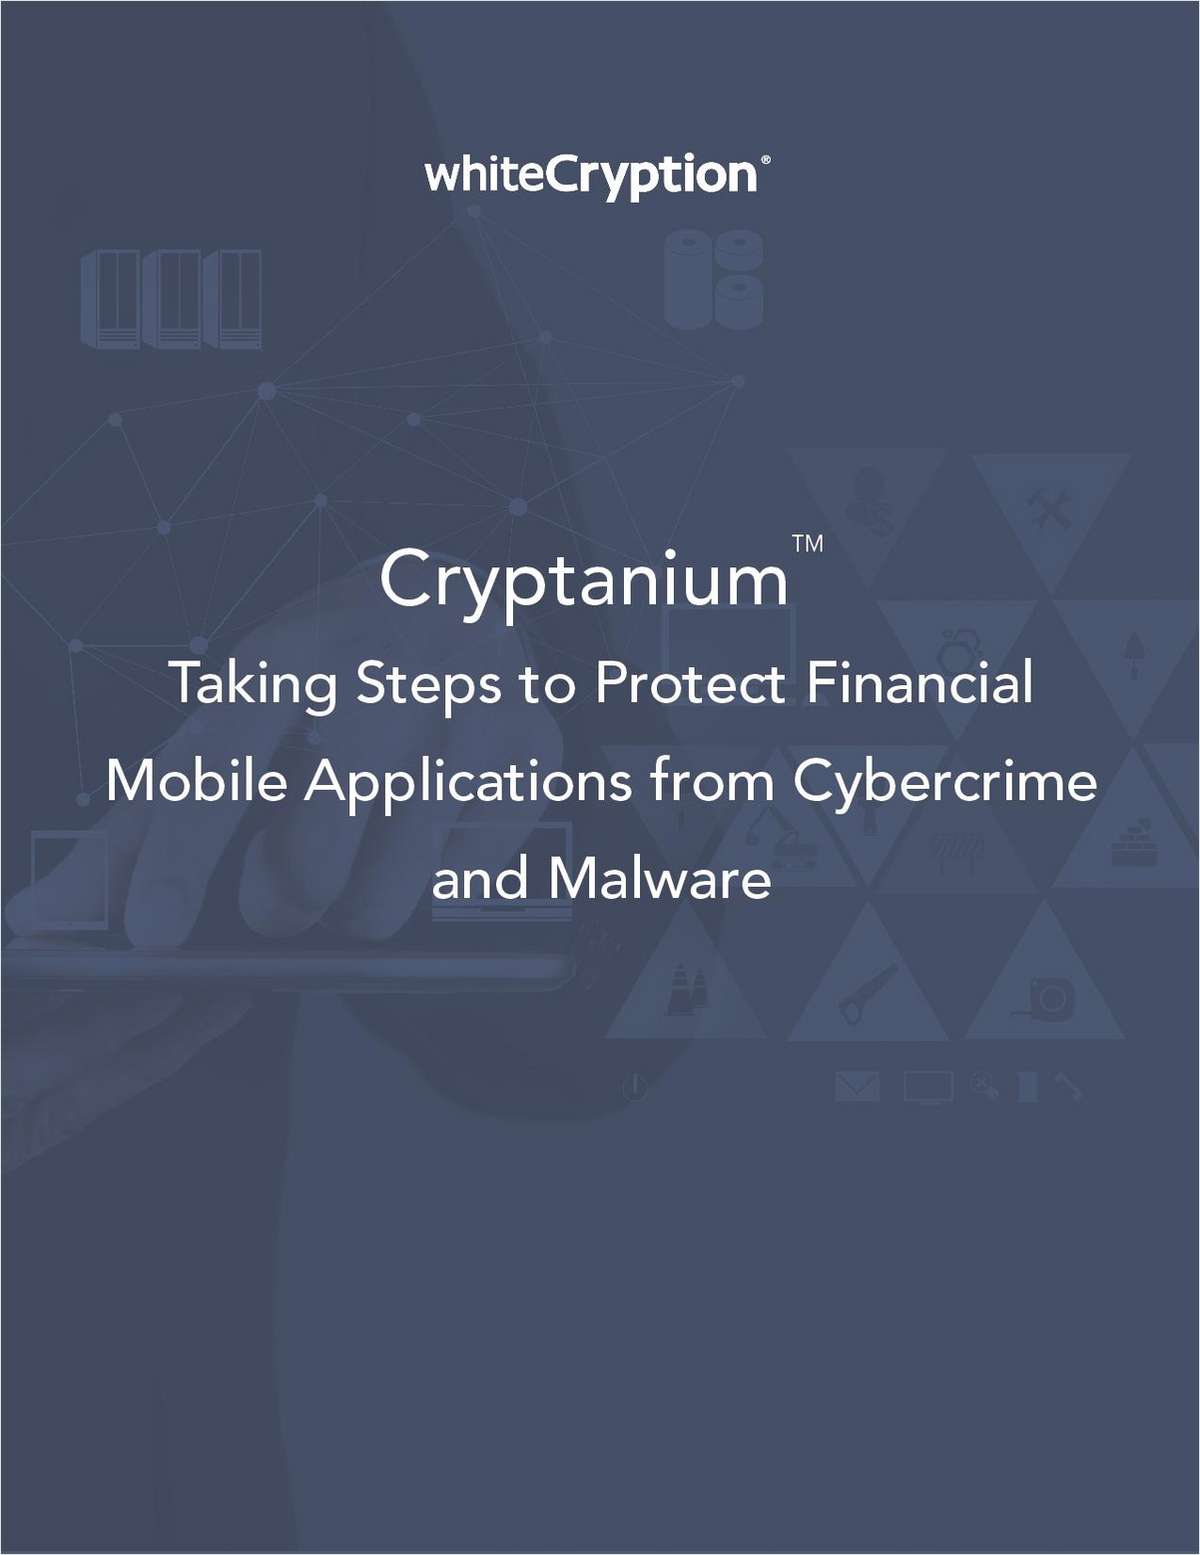 Taking Steps to Protect Financial Mobile Applications from Cybercrime and Malware